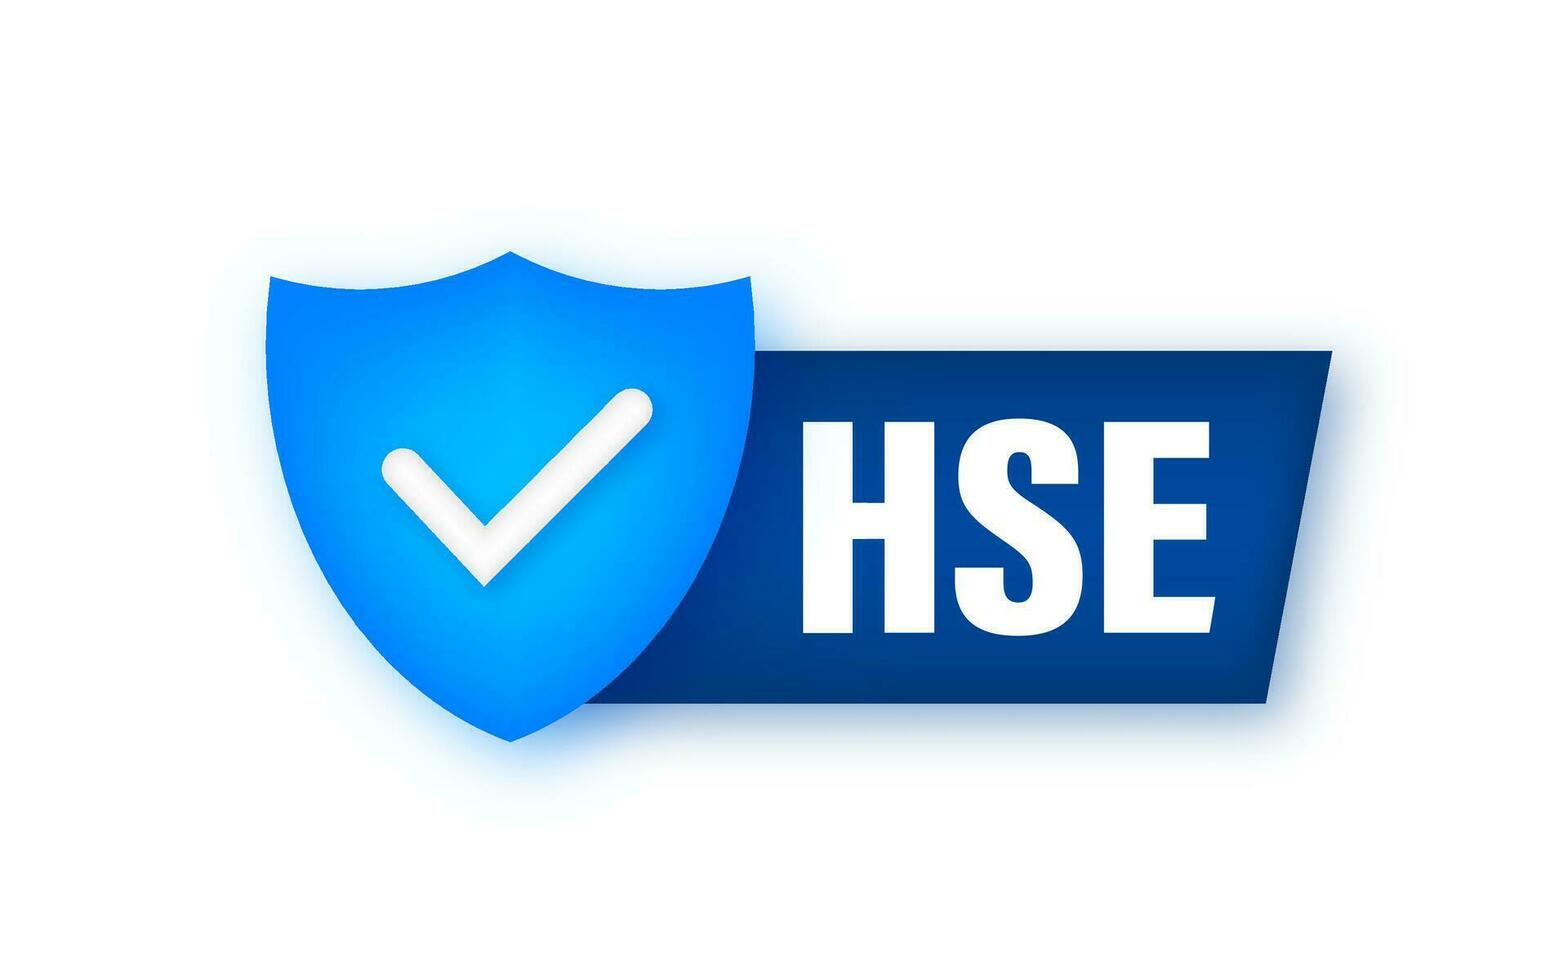 HSE label. Health, Safety, Environment. Icon design. Work safety Poster design Vector stock illustration.